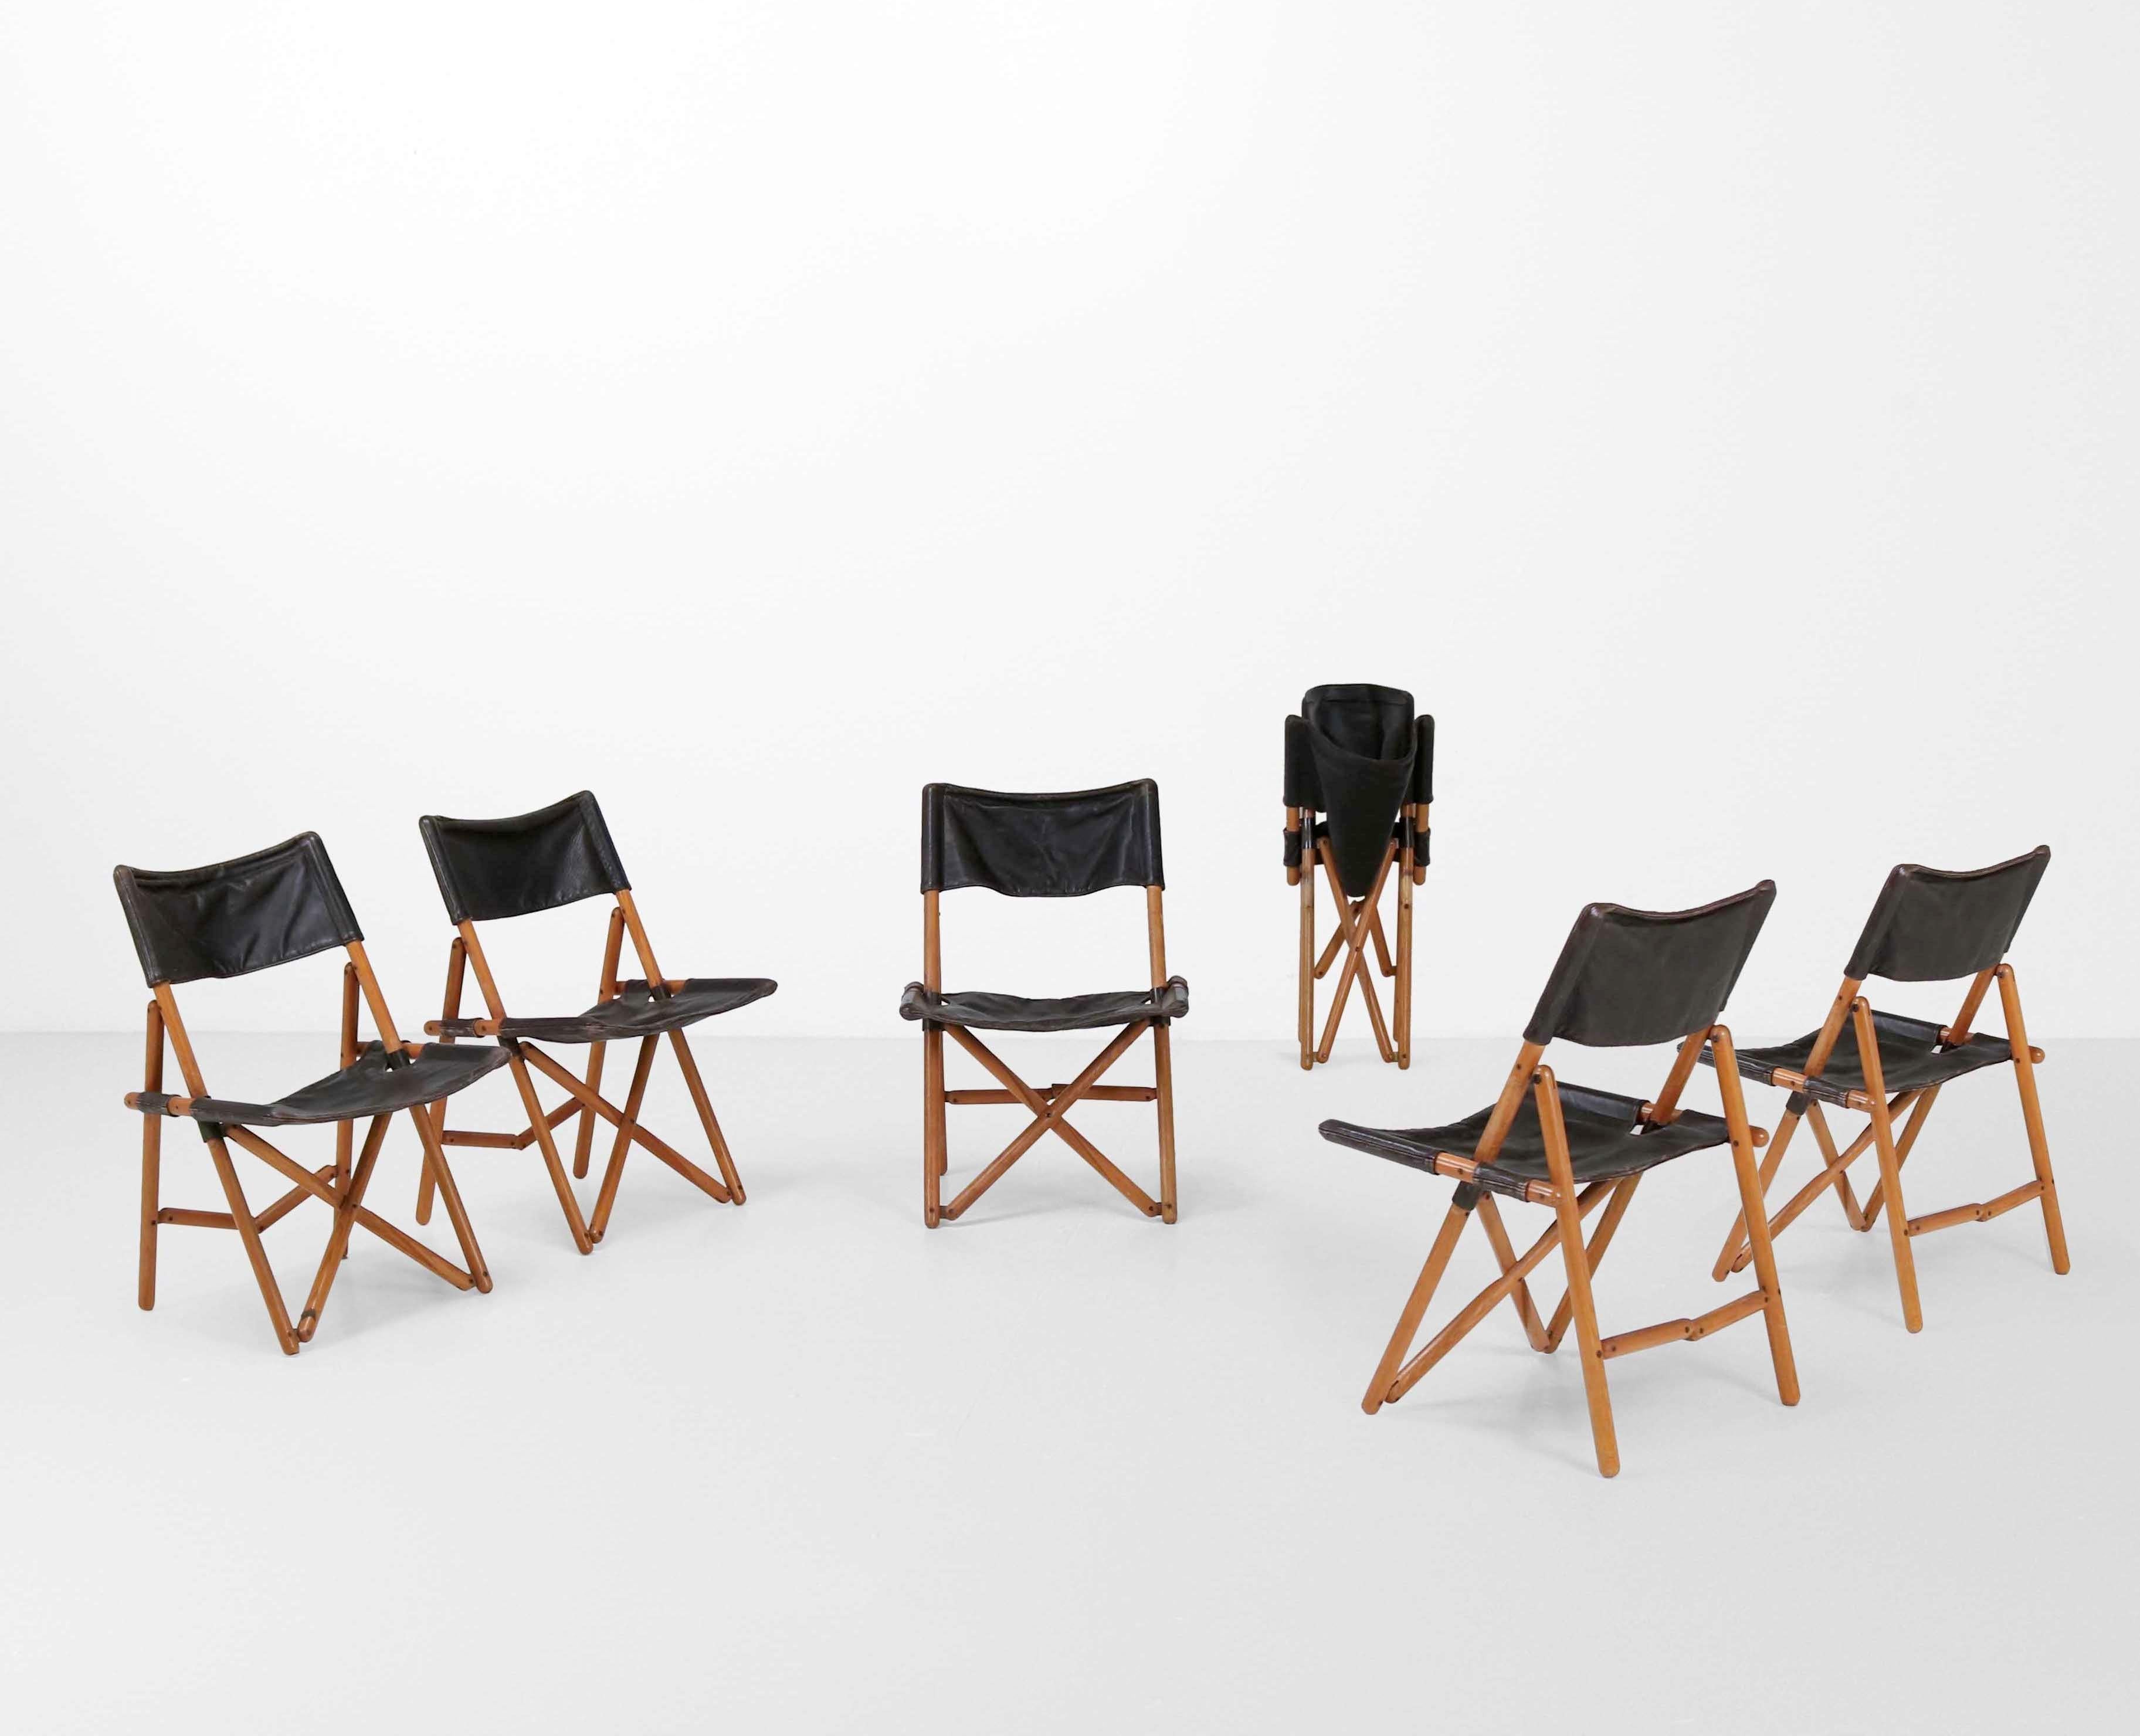 
These Six Folding Chairs model Navy by Sergio Asti represents a Italian Design finesse. Crafted for Zanotta in 1969, these chairs feature wooden structure complemented by metal detailing and luxurious leather seating and backs. Asti's minimalist